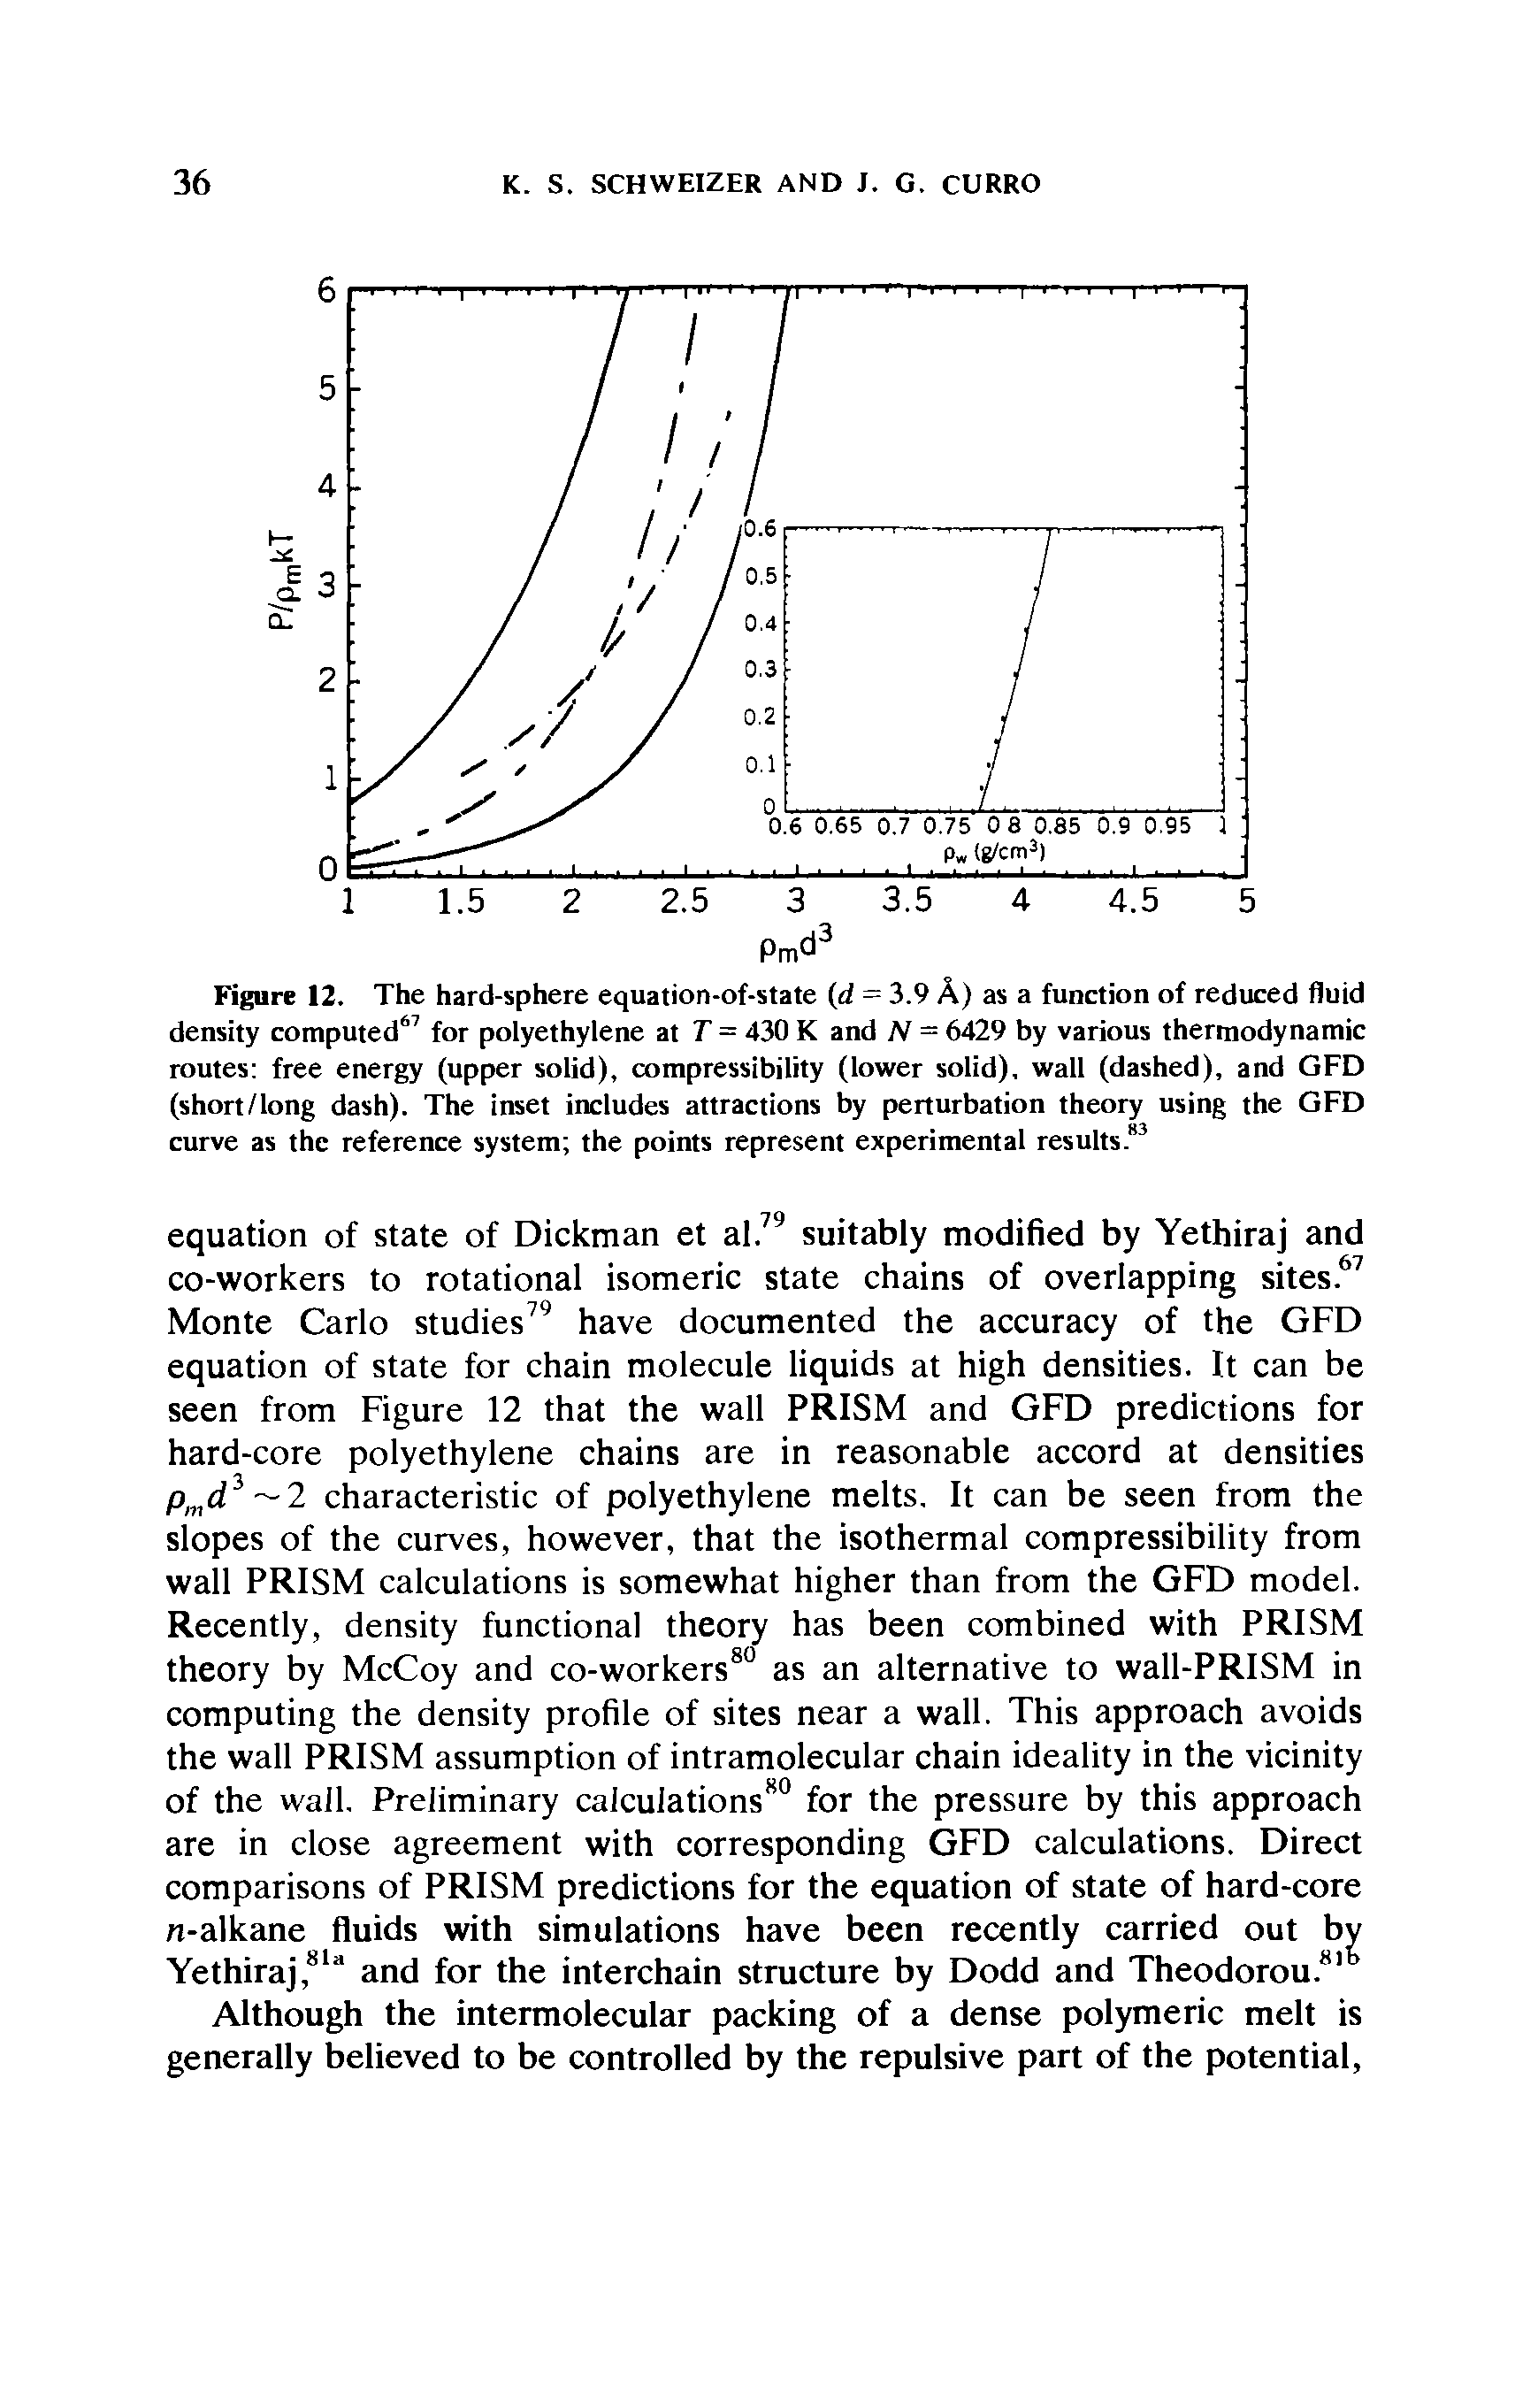 Figure 12. The hard-sphere equation-of-state (d = 3.9 A) as a function of reduced fluid density computed for polyethylene at T = 430 K and N = 6429 by various thermodynamic routes free energy (upper solid), compressibility (lower solid), wall (dashed), and GFD (short/long dash). The inset includes attractions by perturbation theory using the GFD curve as the reference system the points represent experimental results. ...